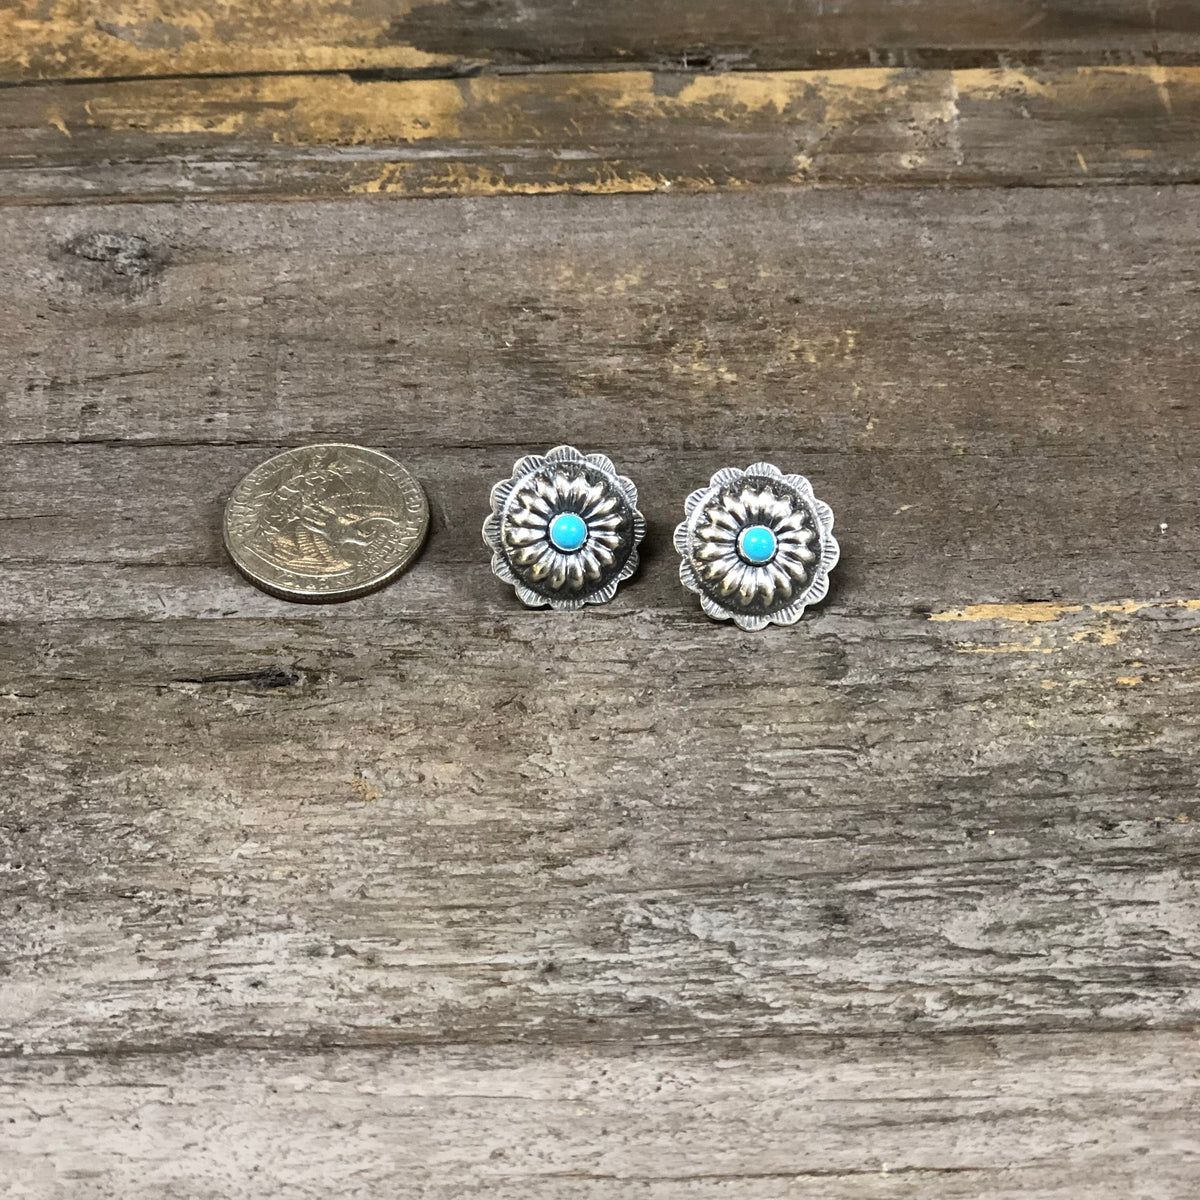 Handmade Sterling Silver and Kingman Turquoise Concho Earrings